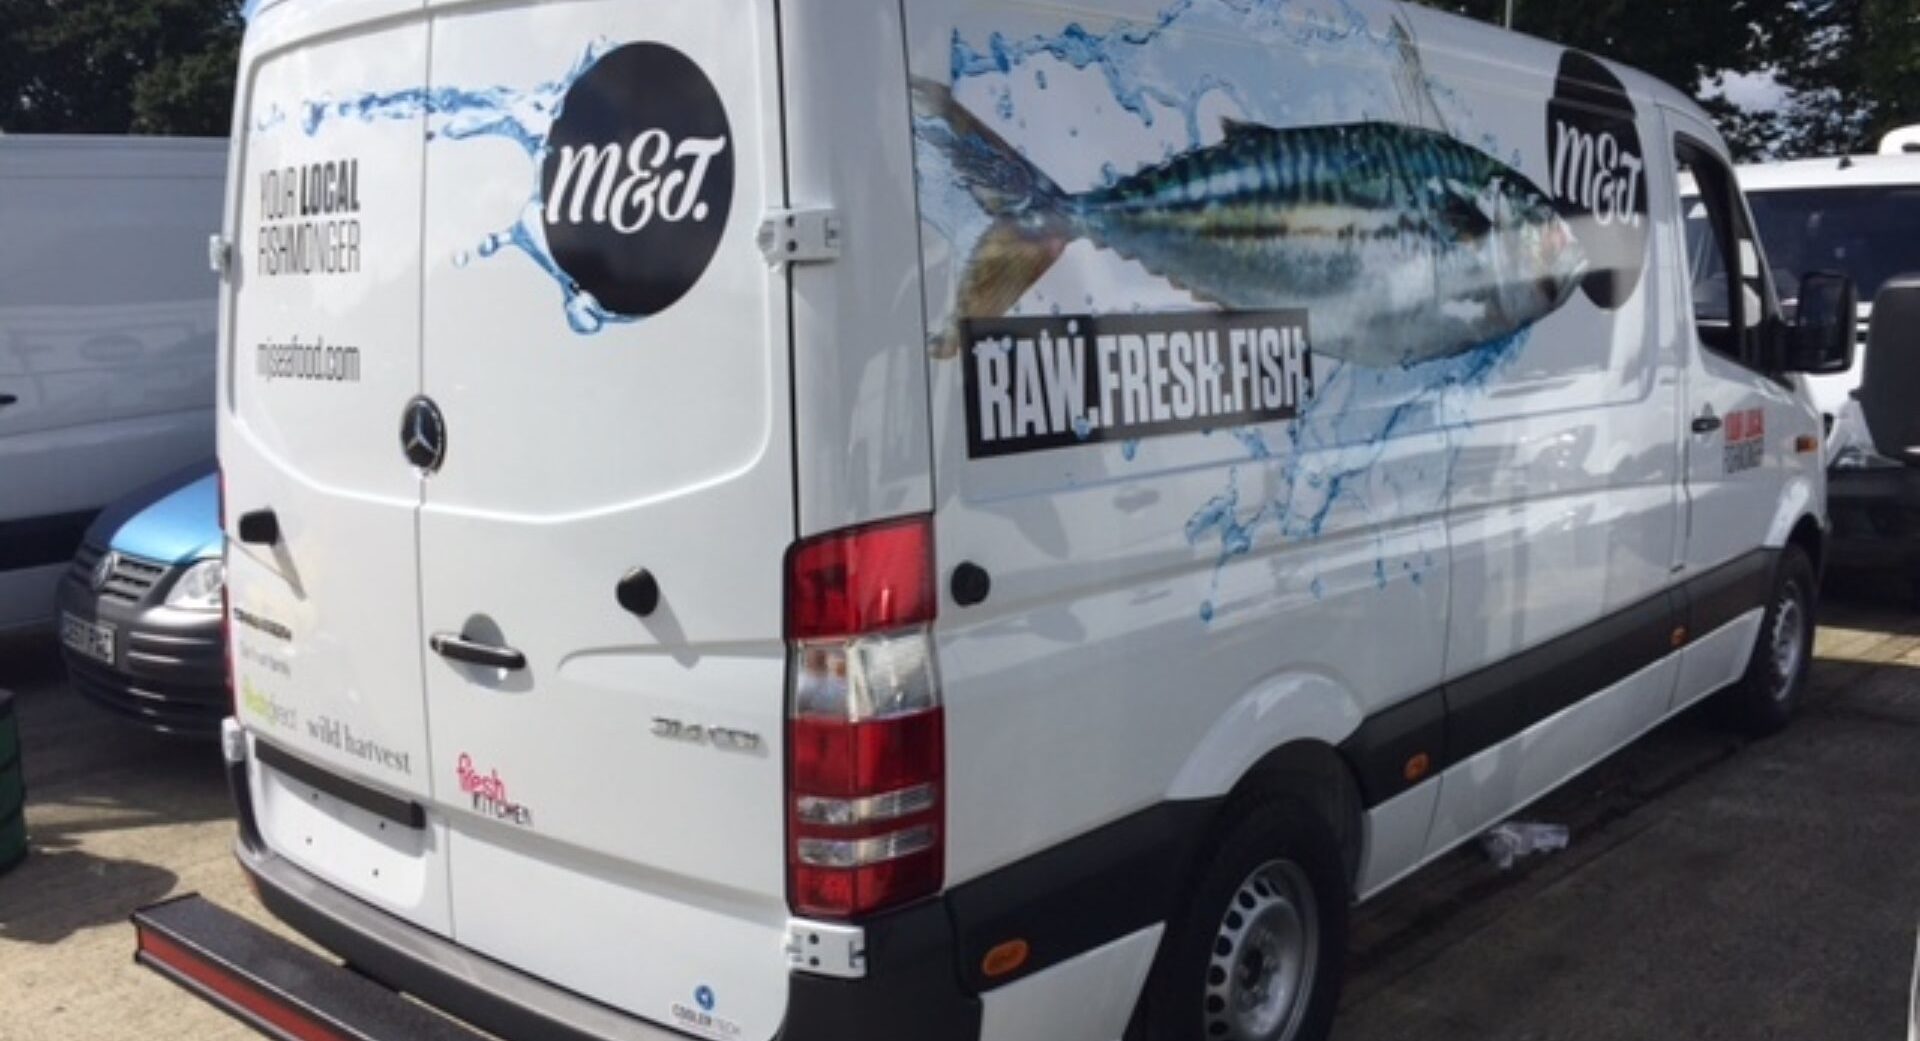 Daily recap, May 19: Sysco plans to close M&J sites in UK; Pollock fillet  prices unlikely to drop - Undercurrent News